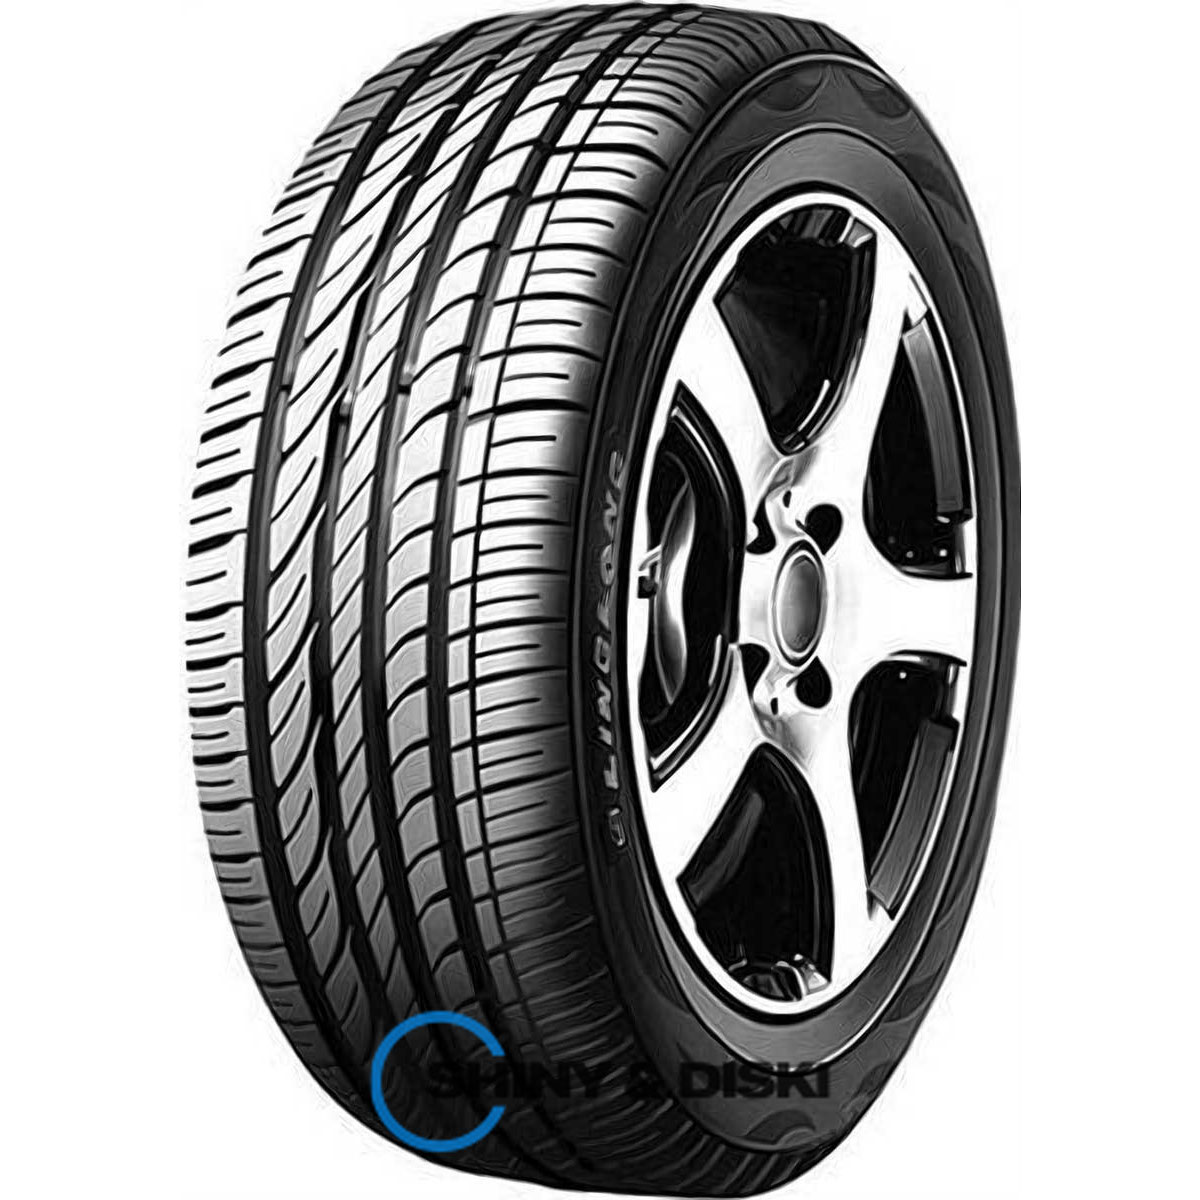 ling long greenmax ecotouring 165/70 r13 79t